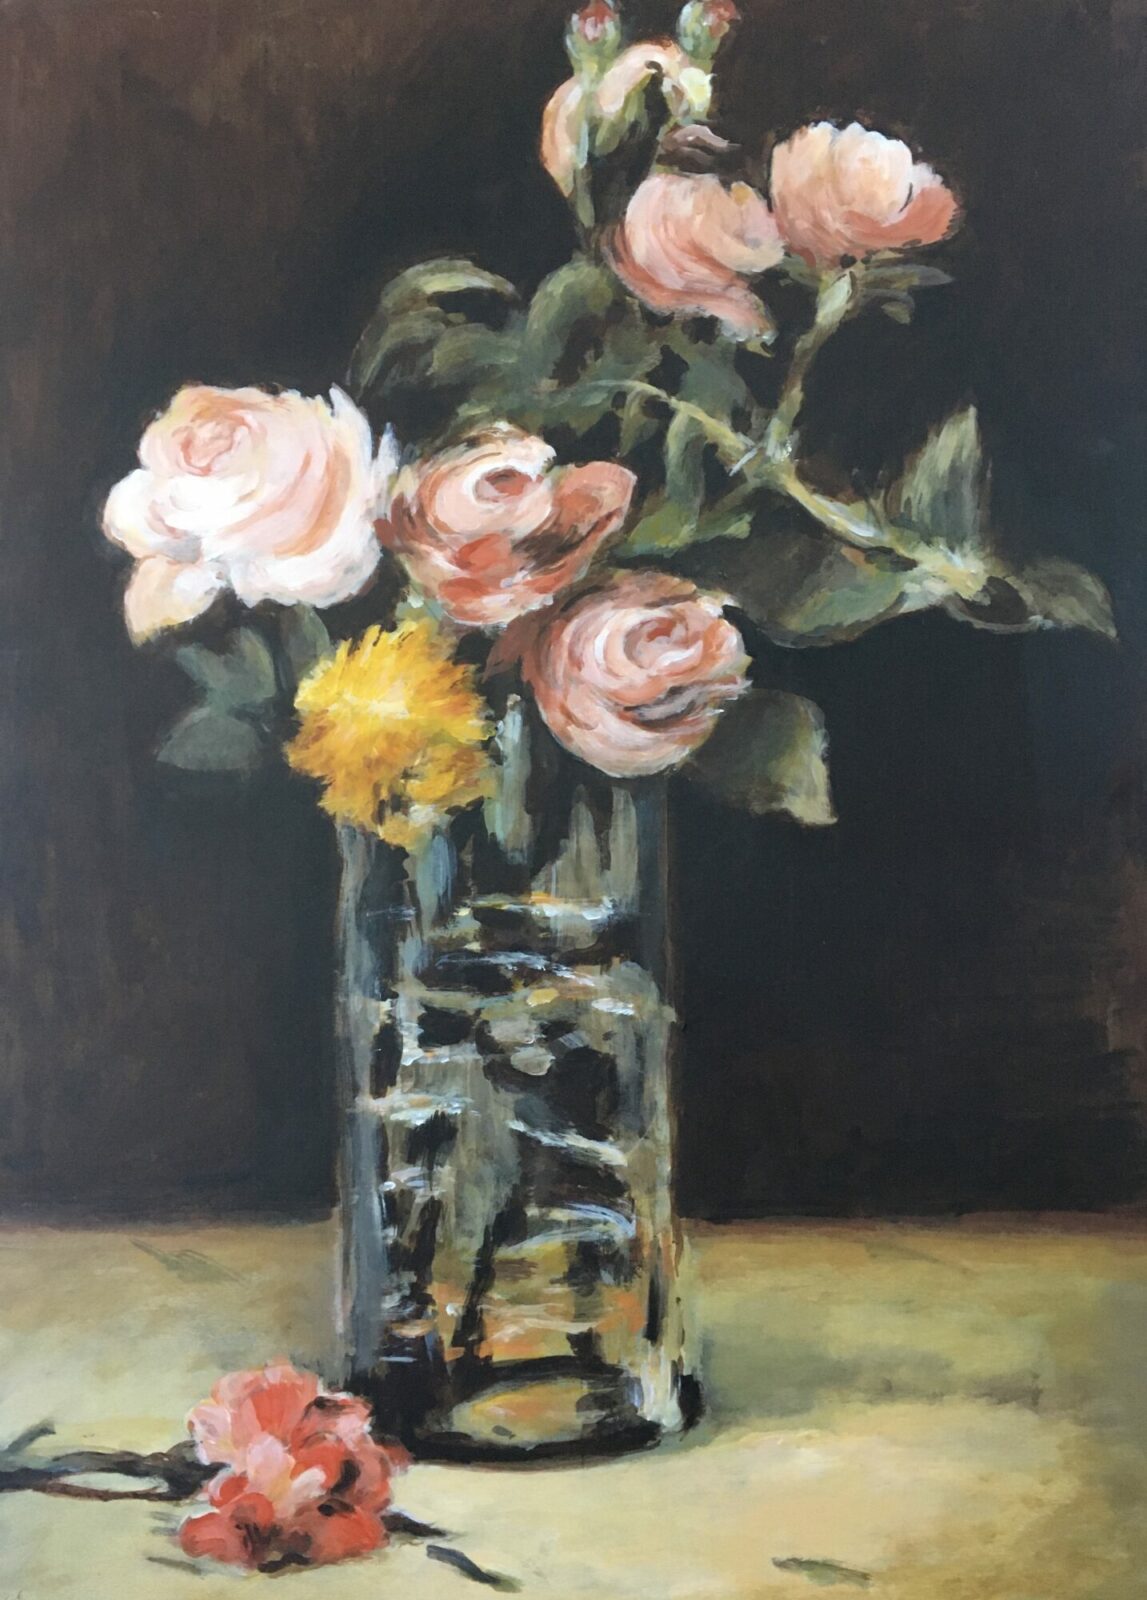 study of edouard manet’s ‘roses in a glass vase’ 1883